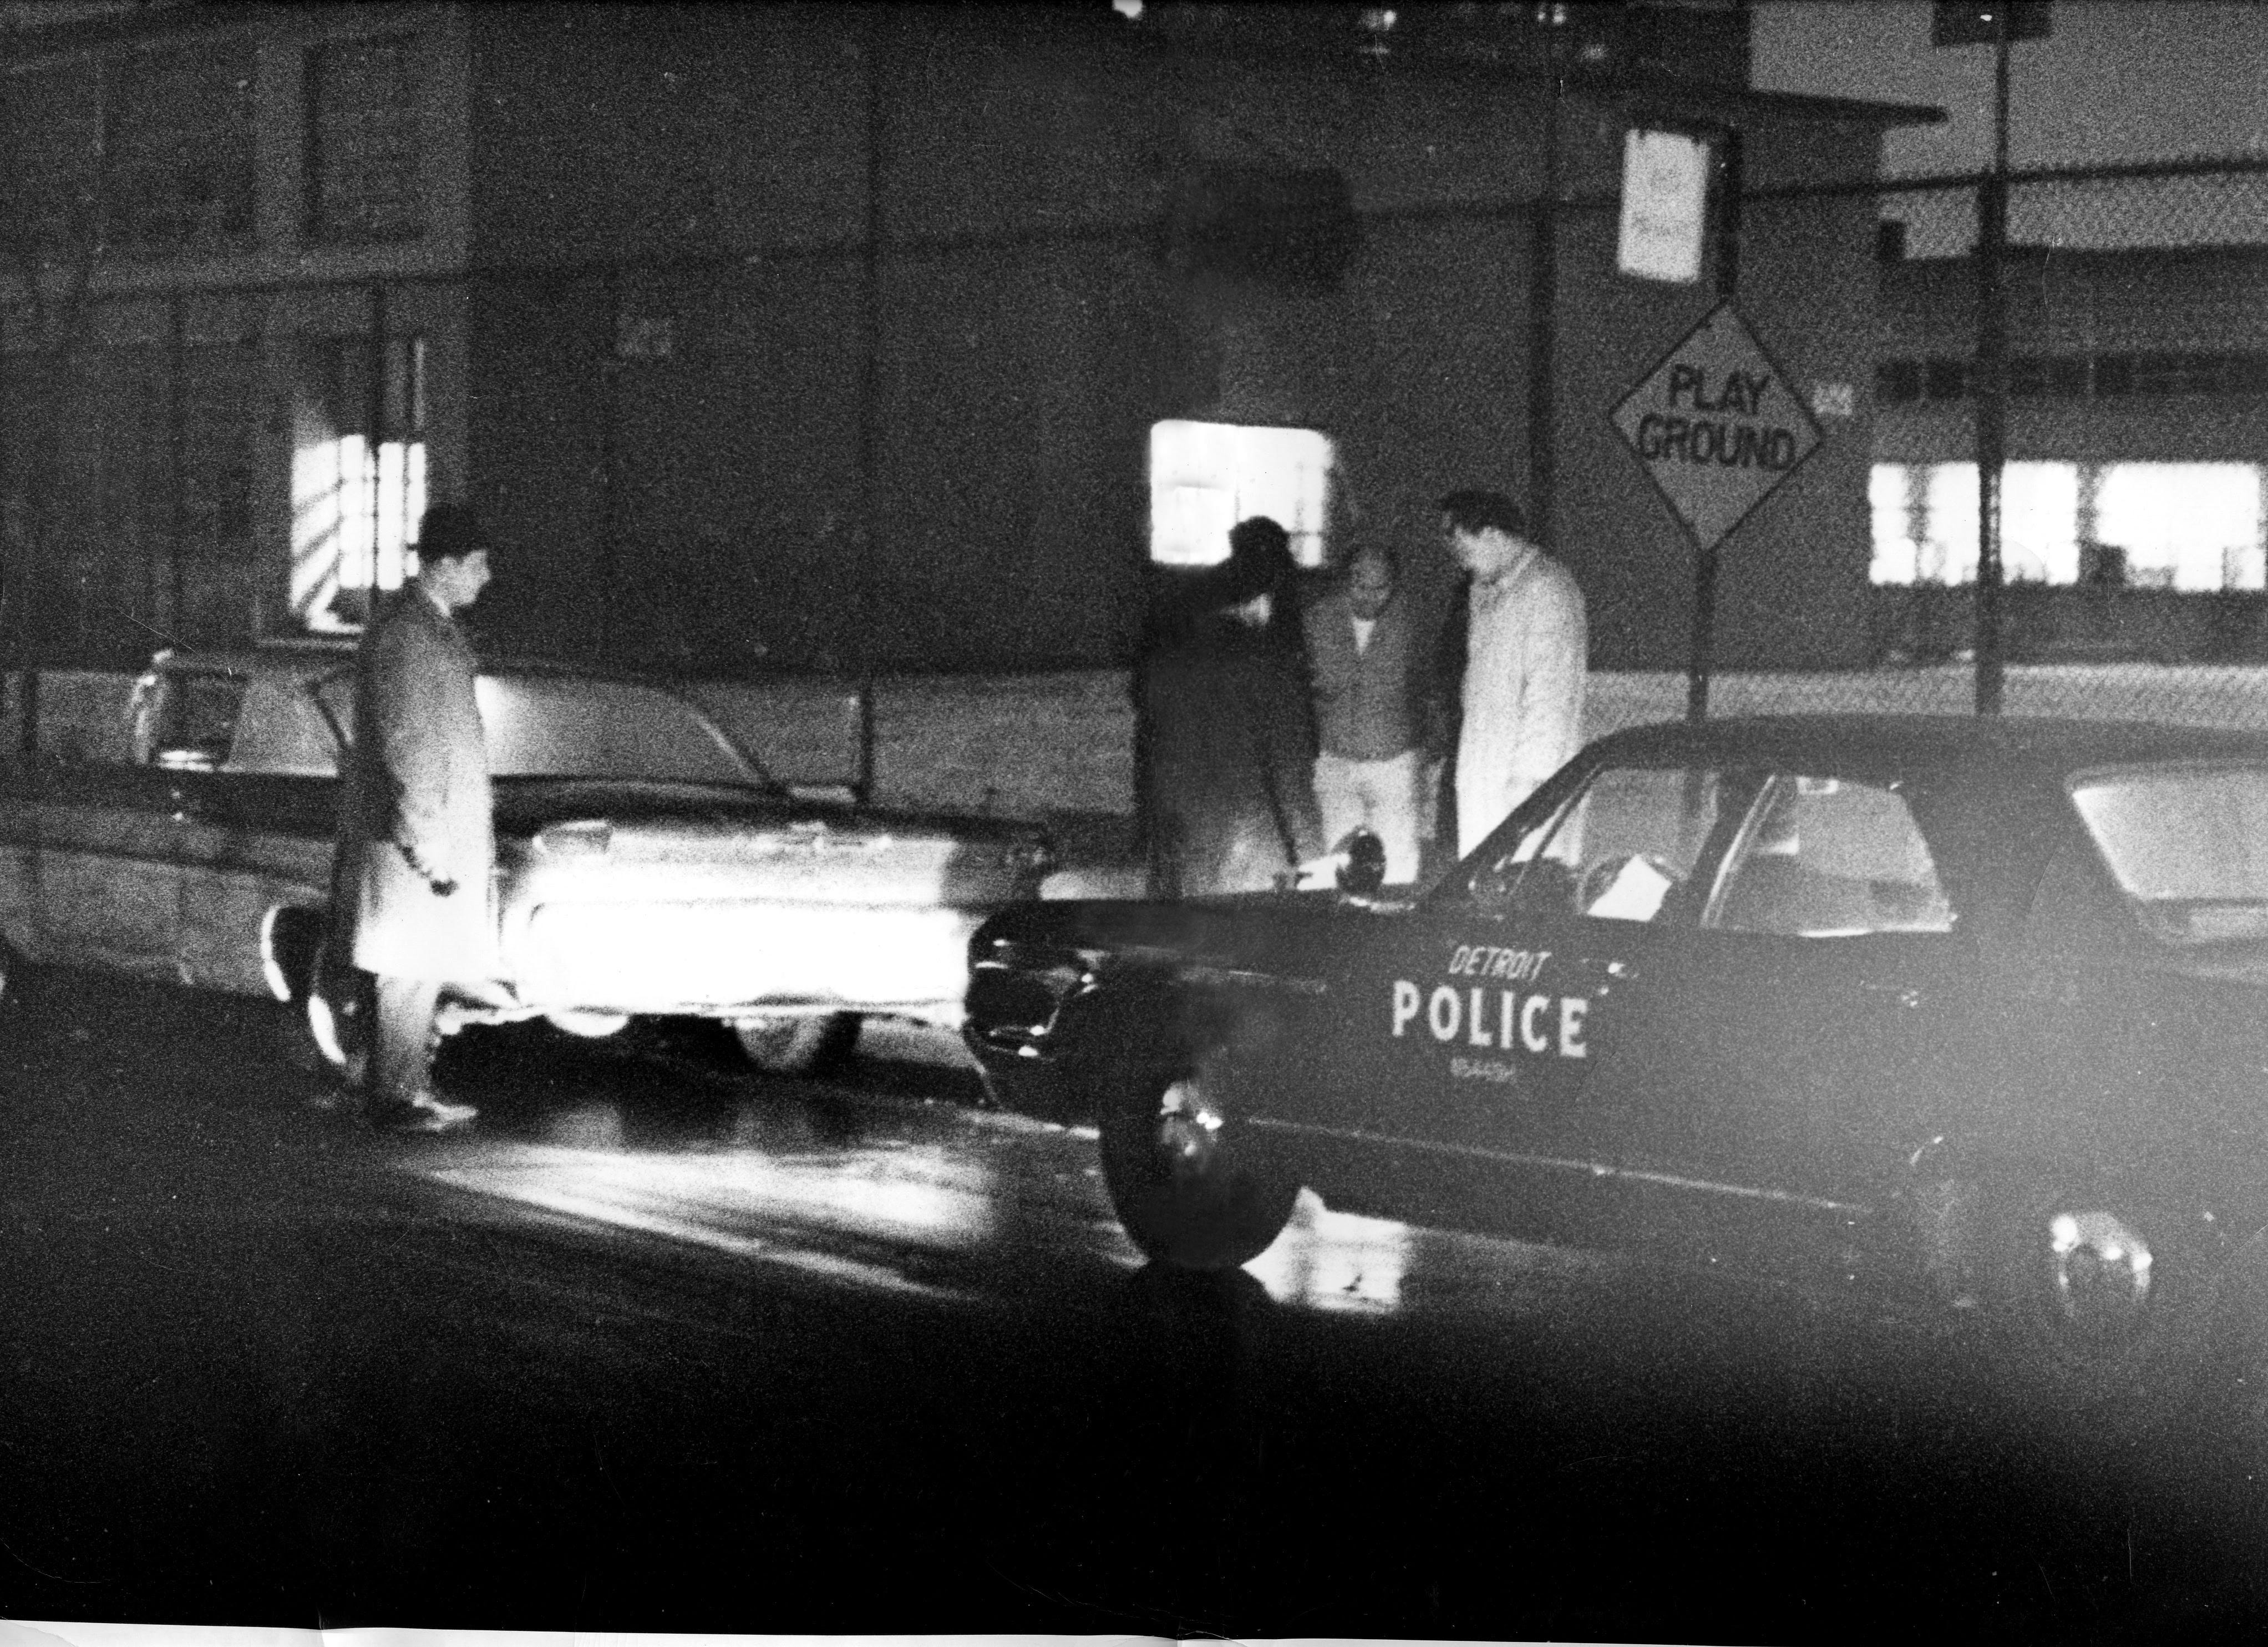 Members of one of the Detroit police units known as "Big Four" units make a stop. A Big Four unit, consisting of three plain clothes cops and a uniformed driver in a heavily armed sedan, became notorious for their provocations in black neighborhoods.